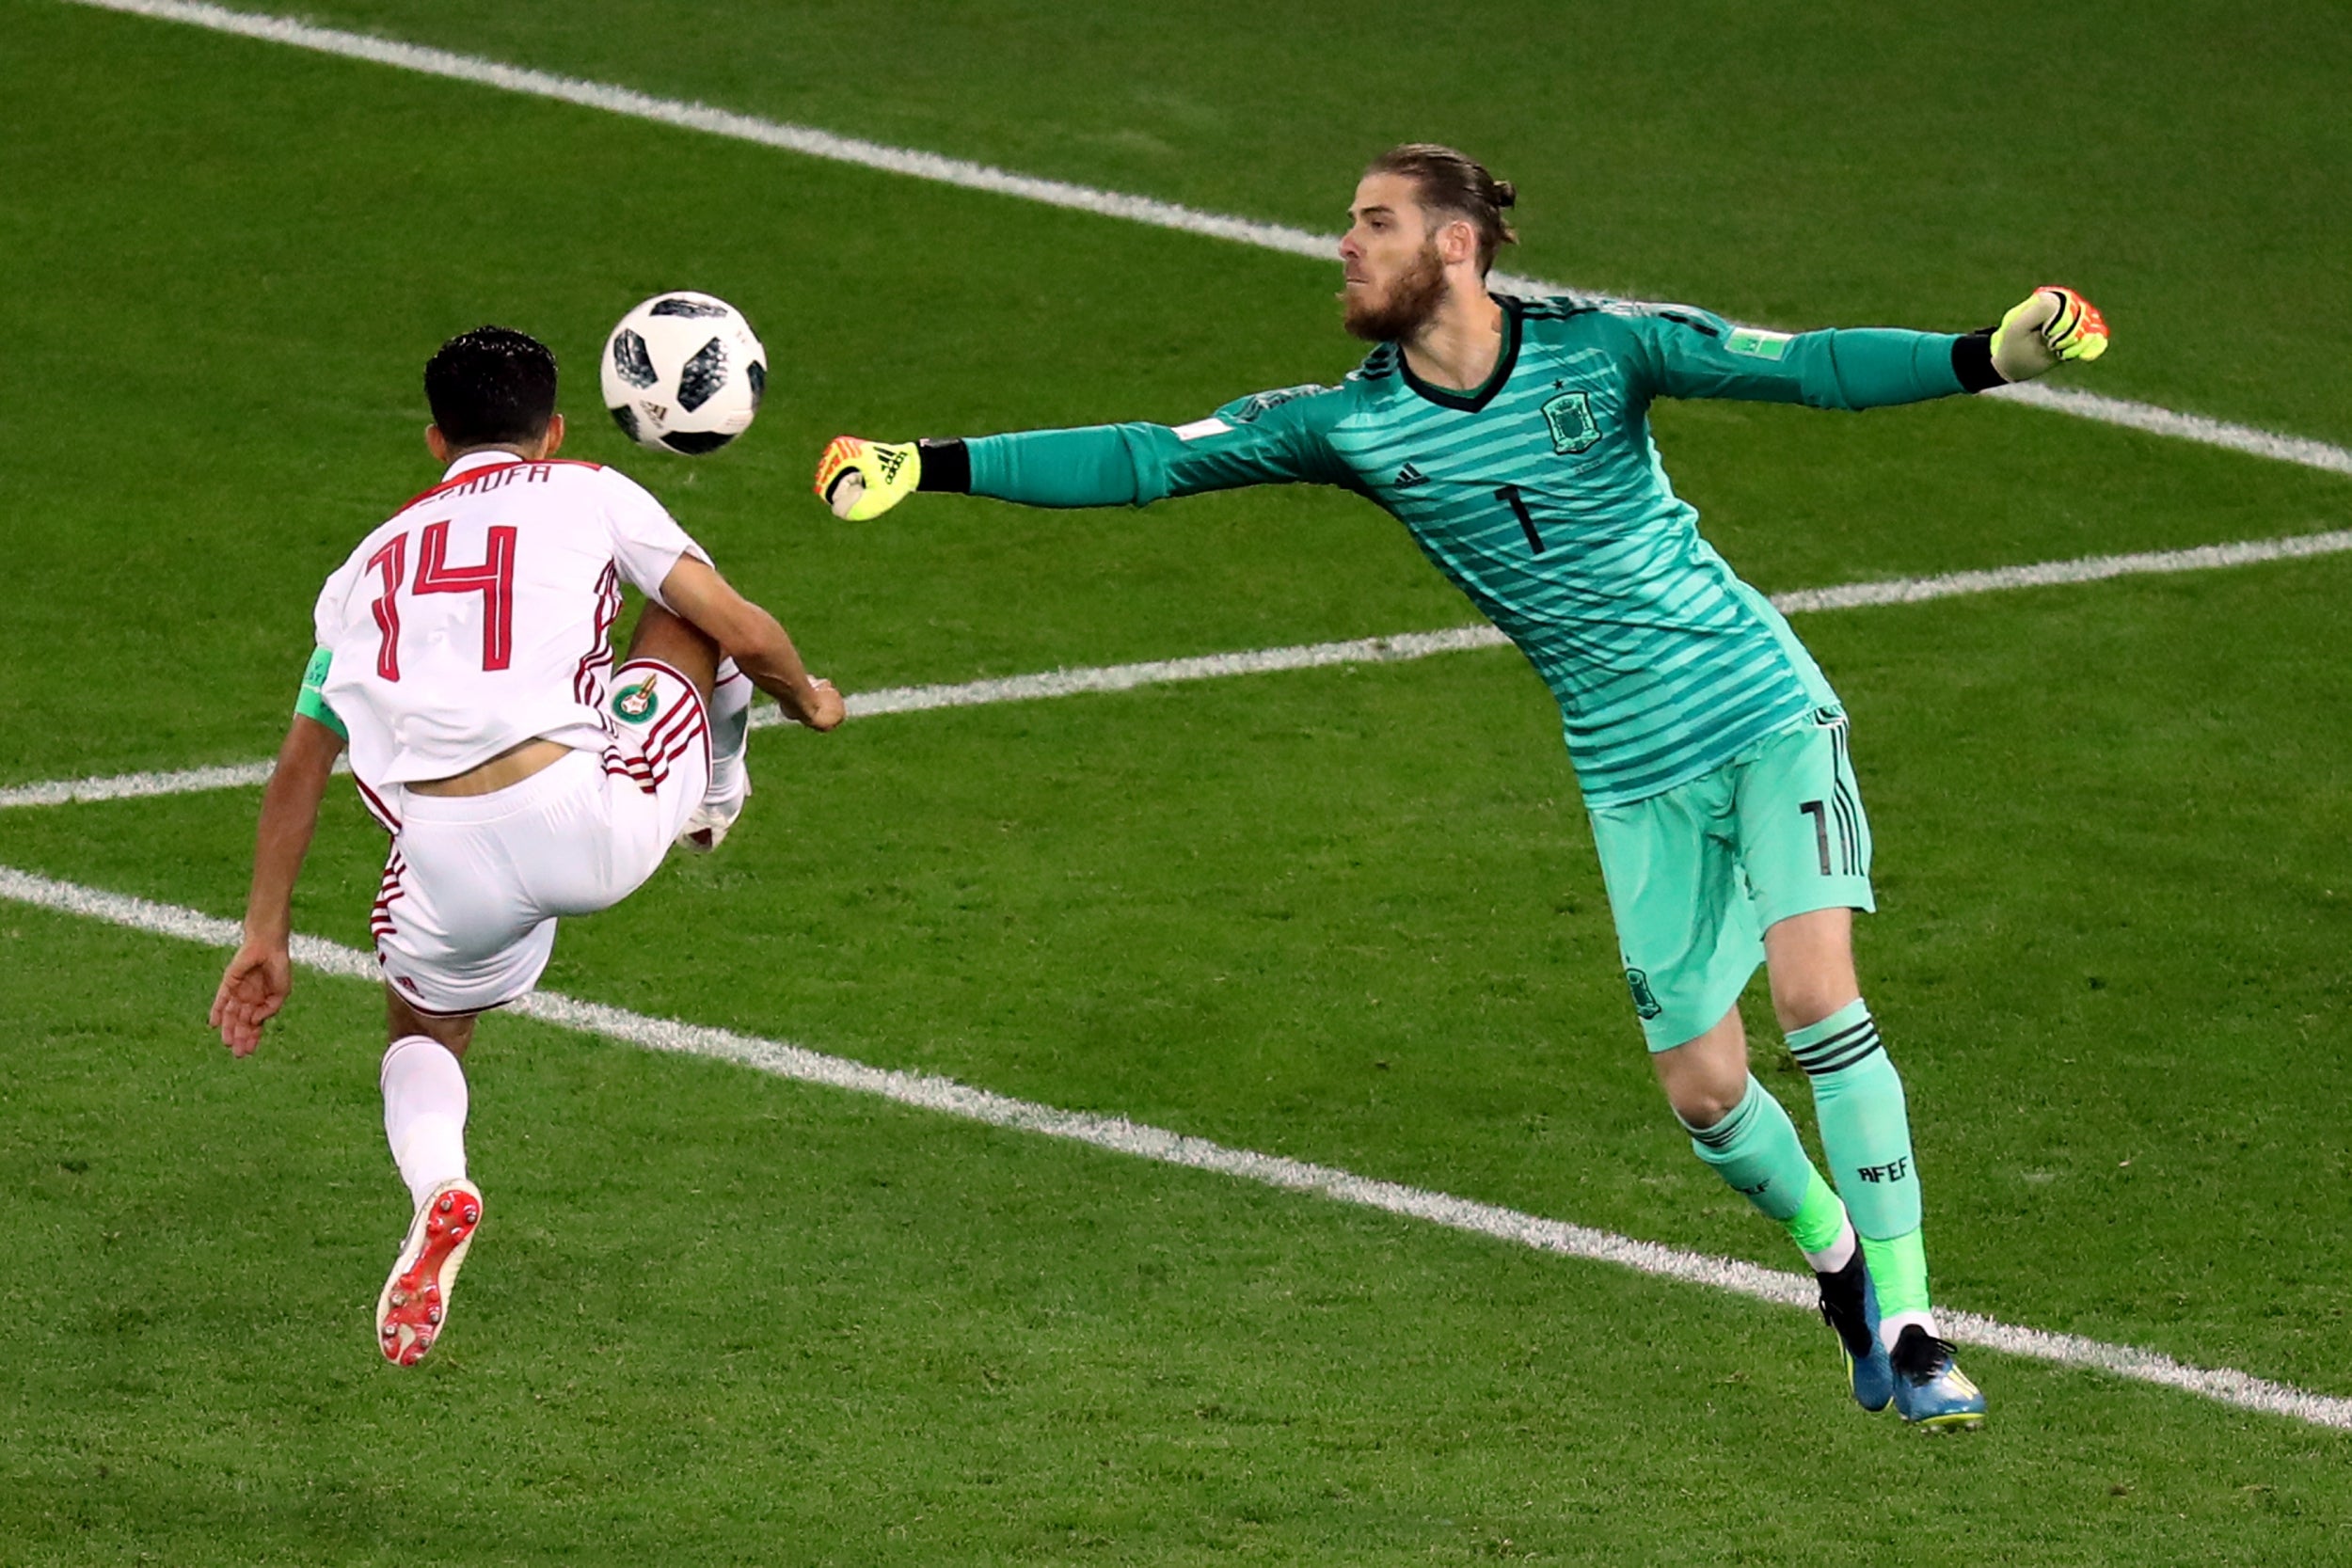 De Gea's place is in doubt after a shaky group stage